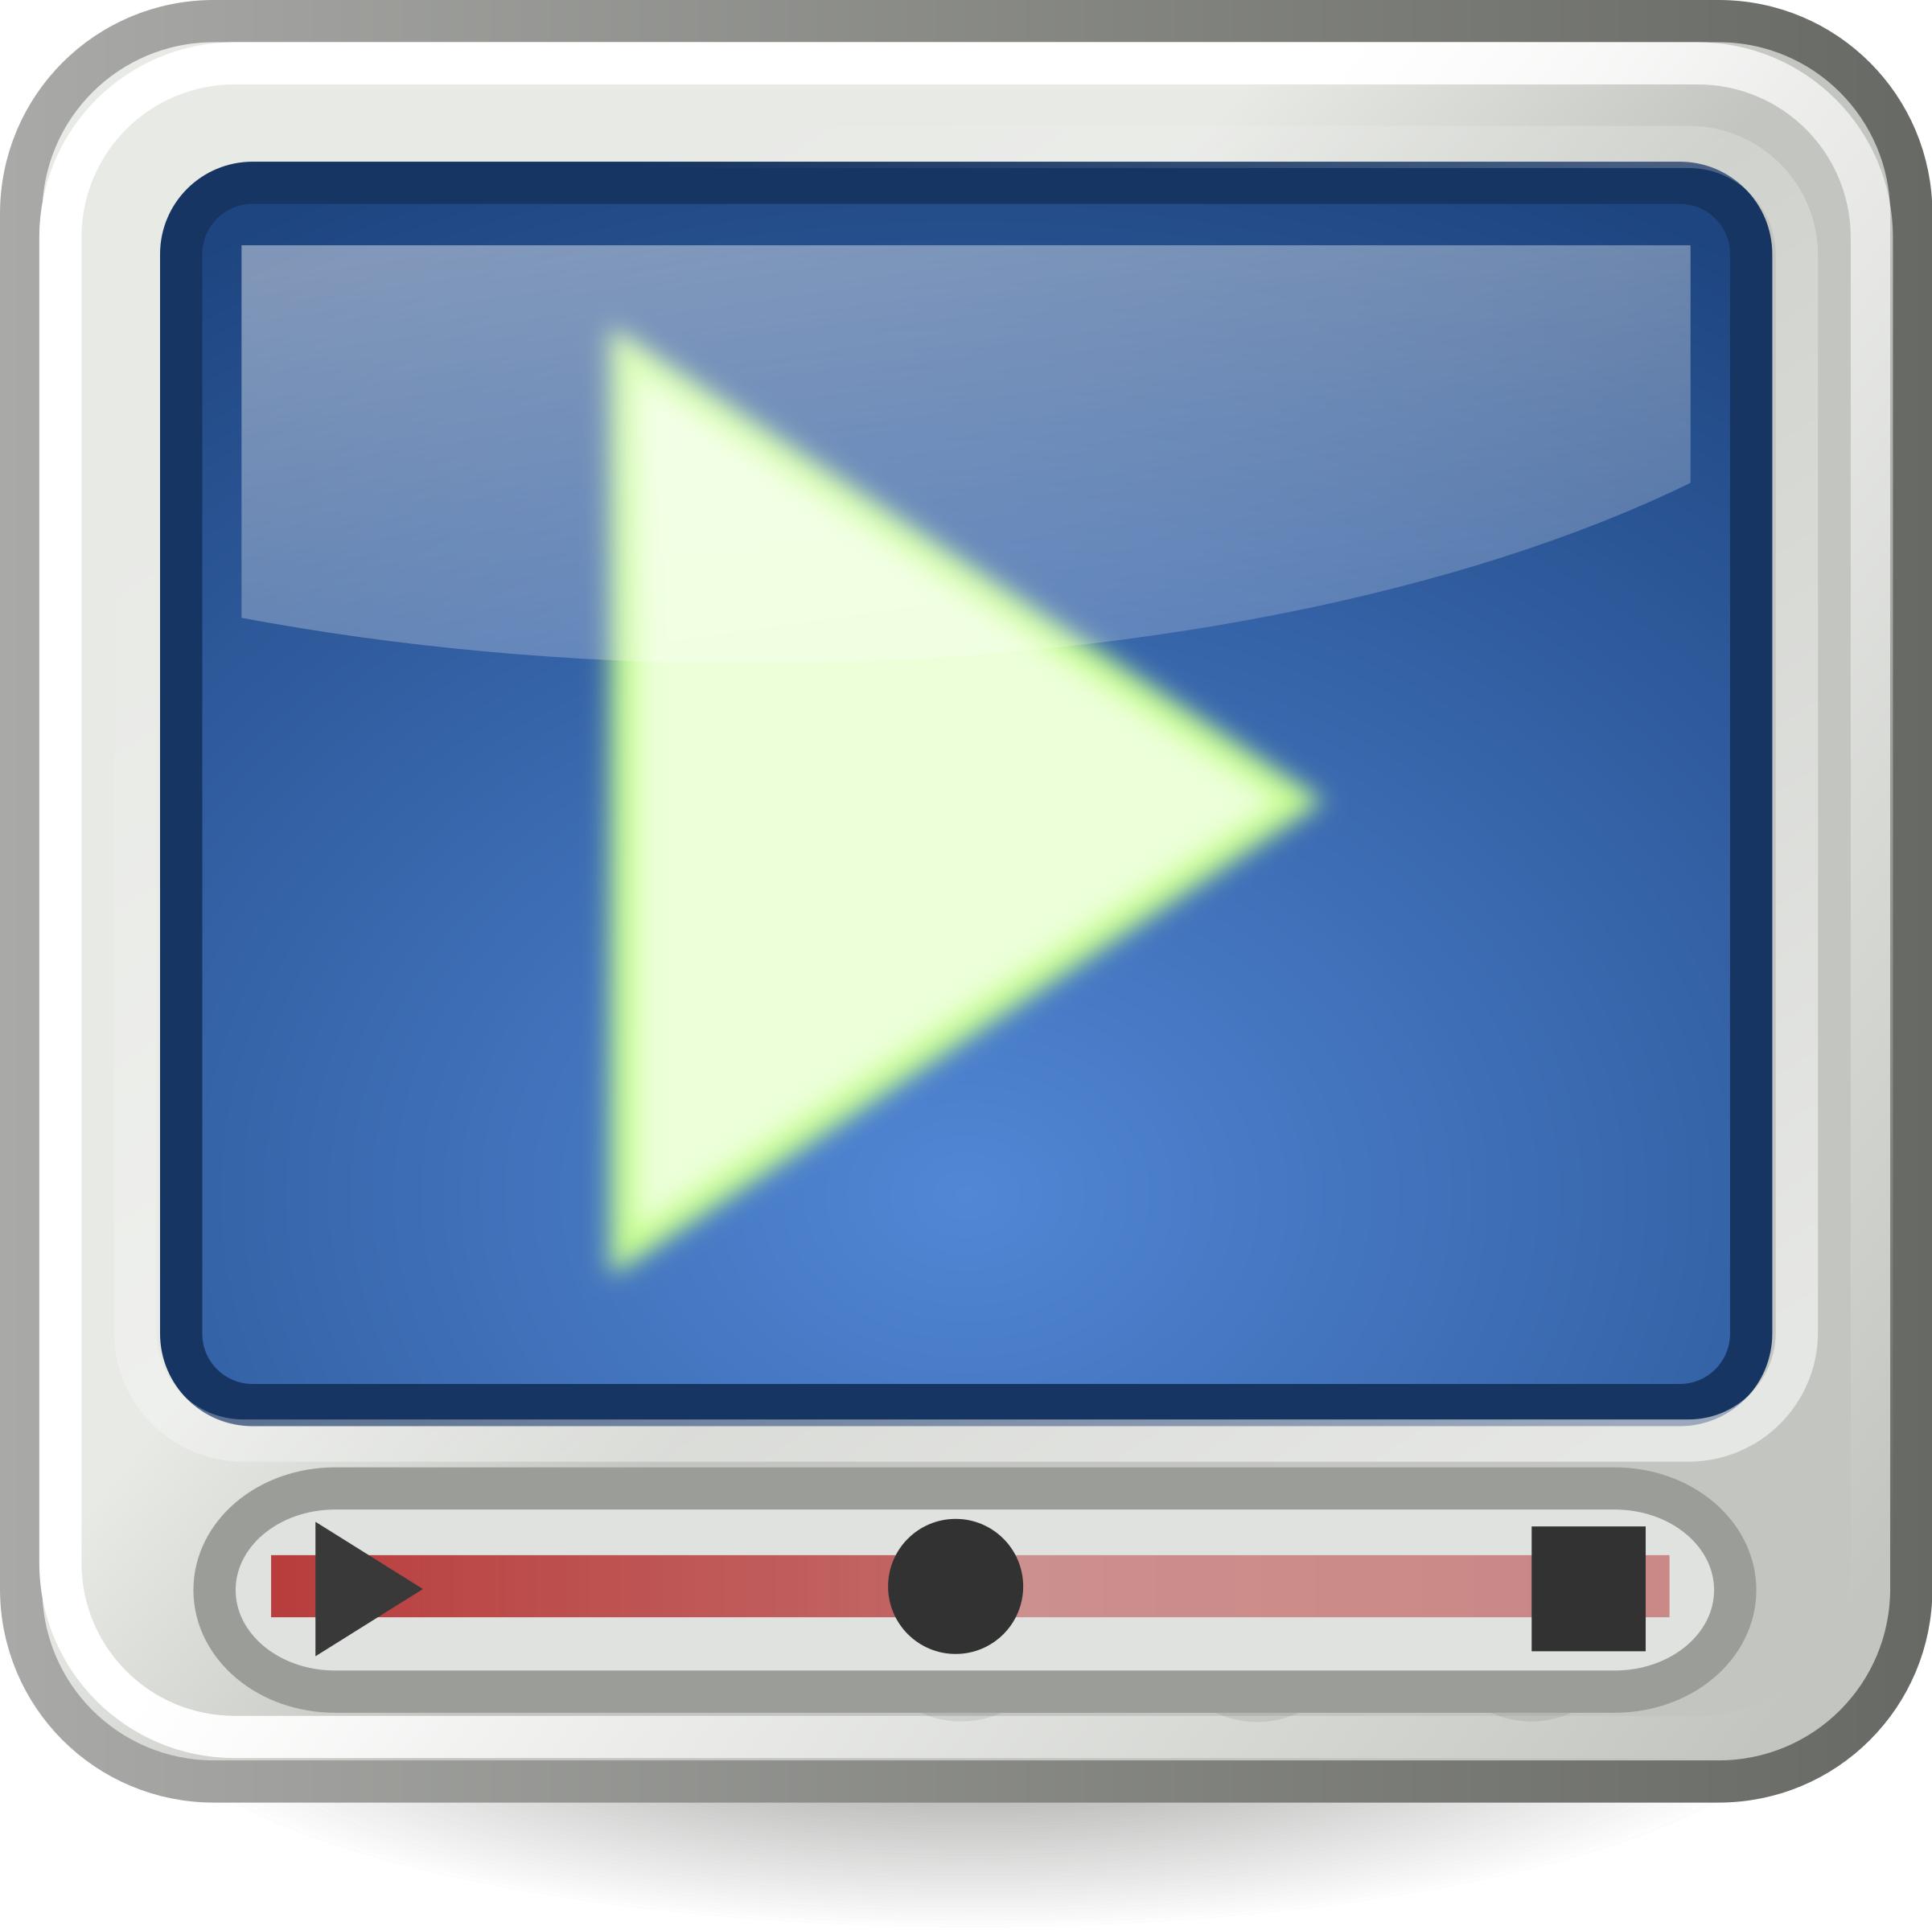 Tango-styled video player icon PNG icons